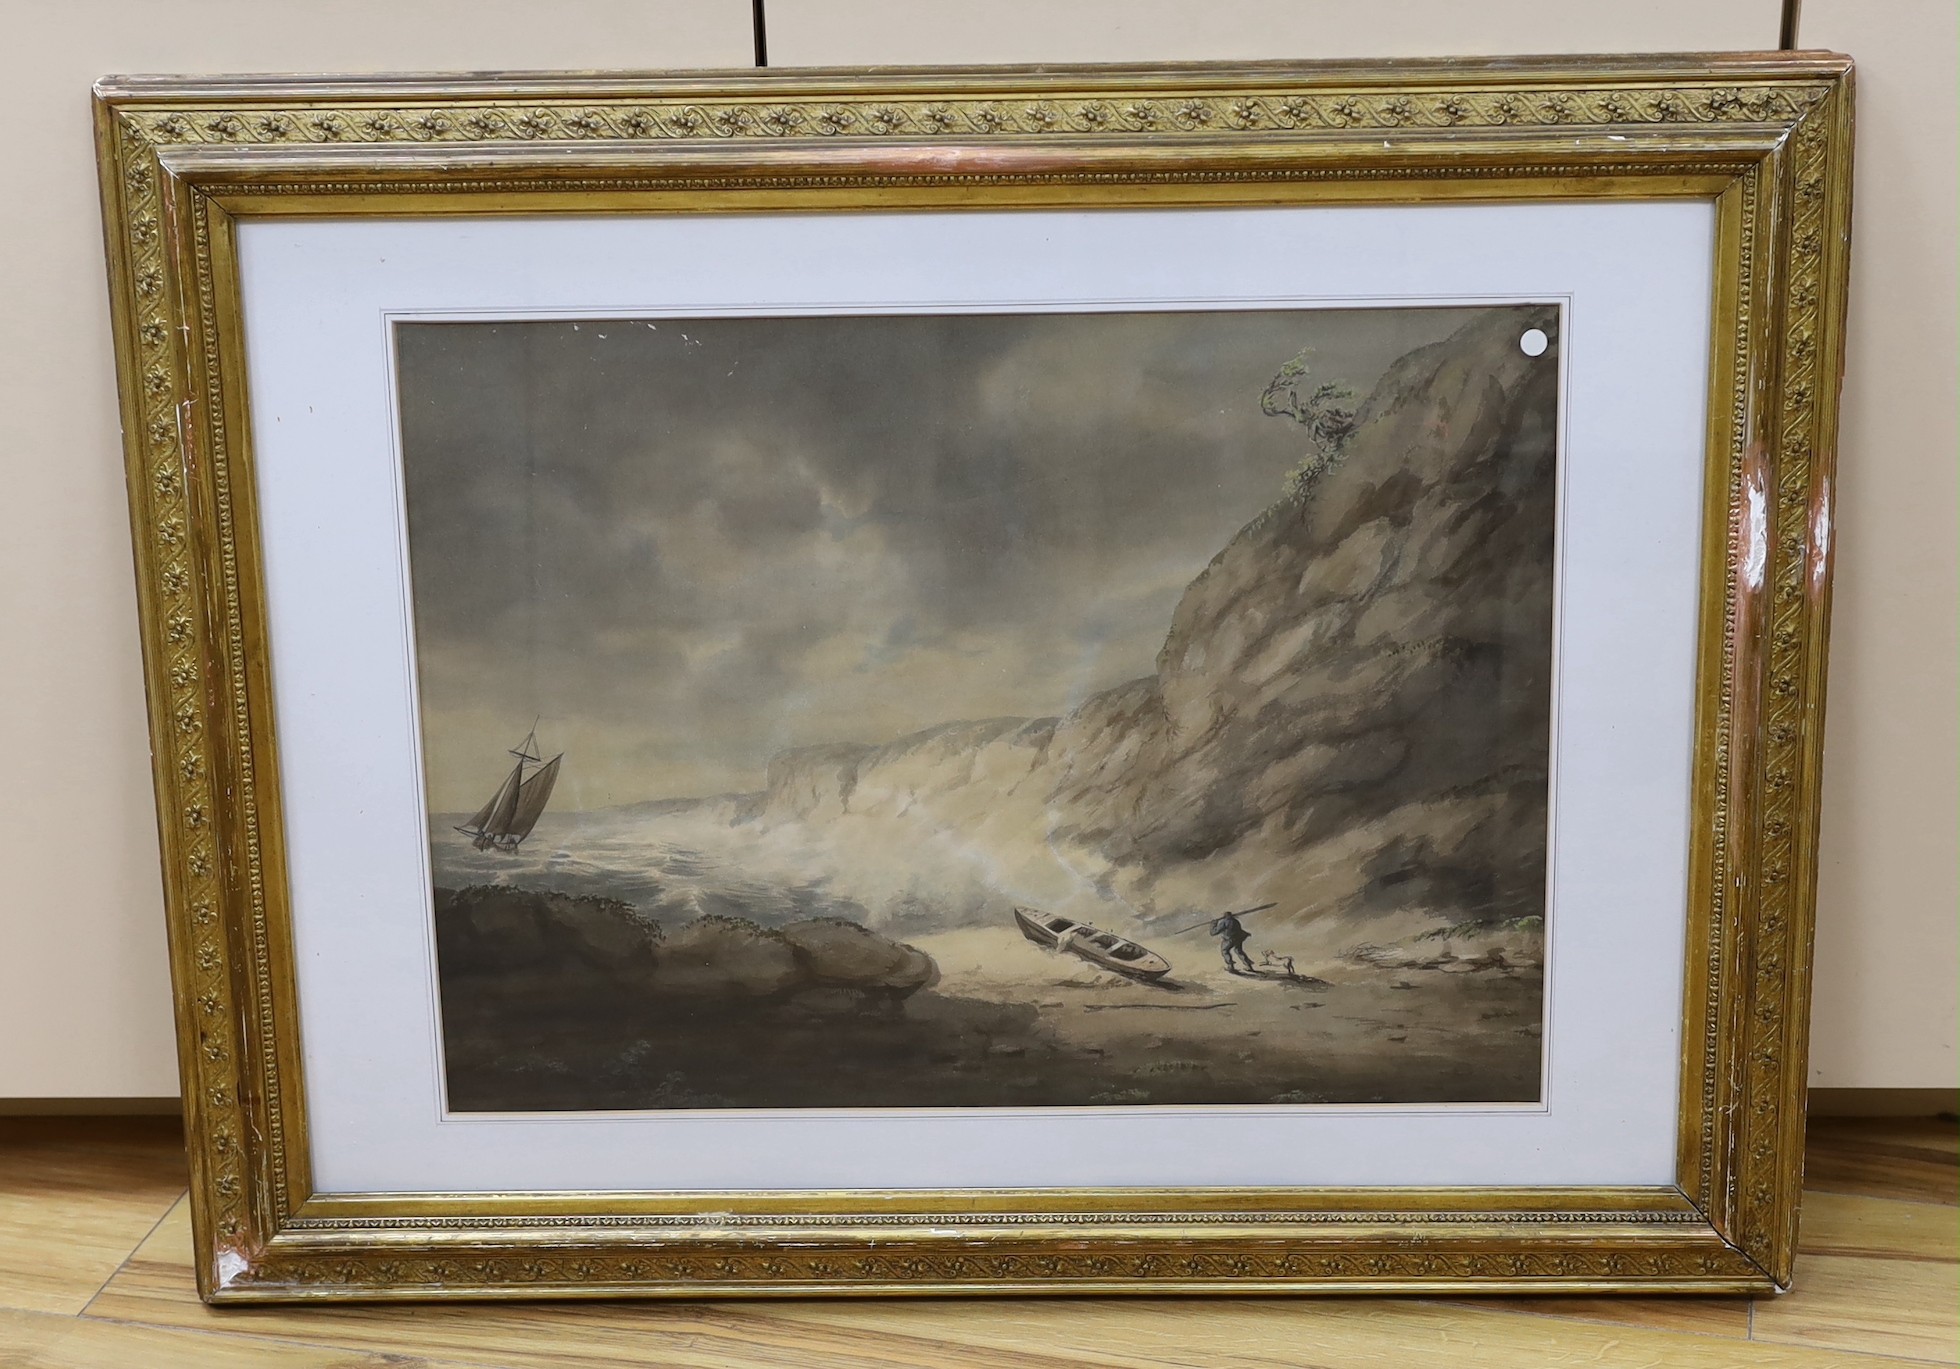 19th century English School, watercolour, Fisherman and dog in a rocky cove, 42 x 58cm - Image 2 of 2